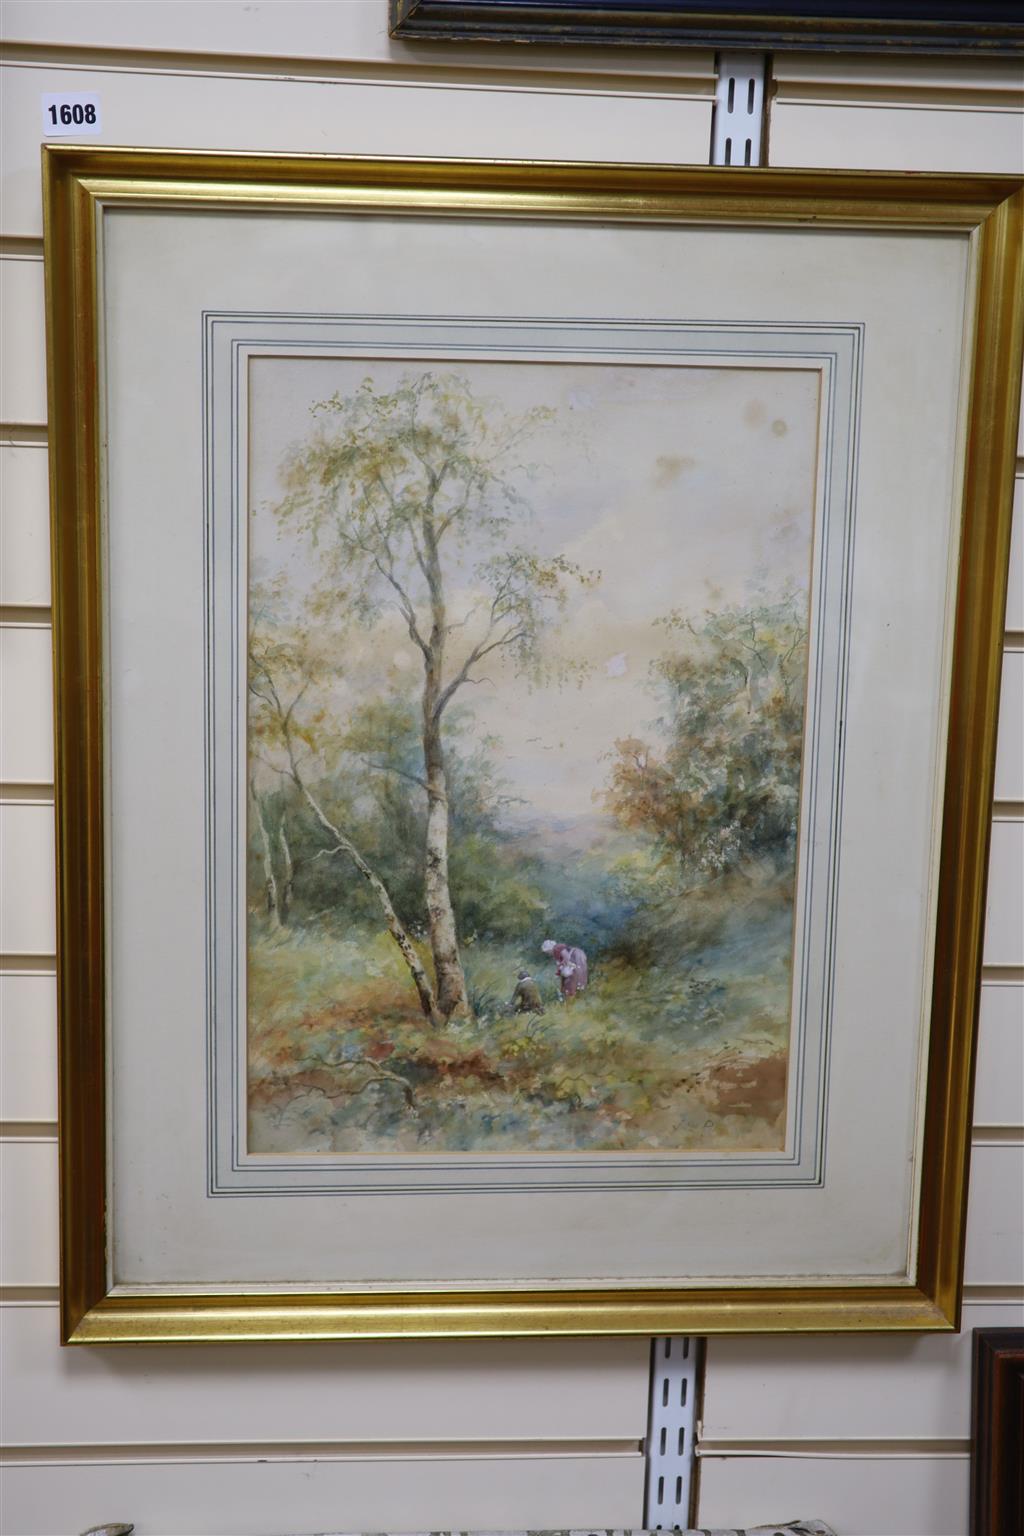 J.W.Philips RA, watercolour, Figures in woodland, signed, 46 x 32cm